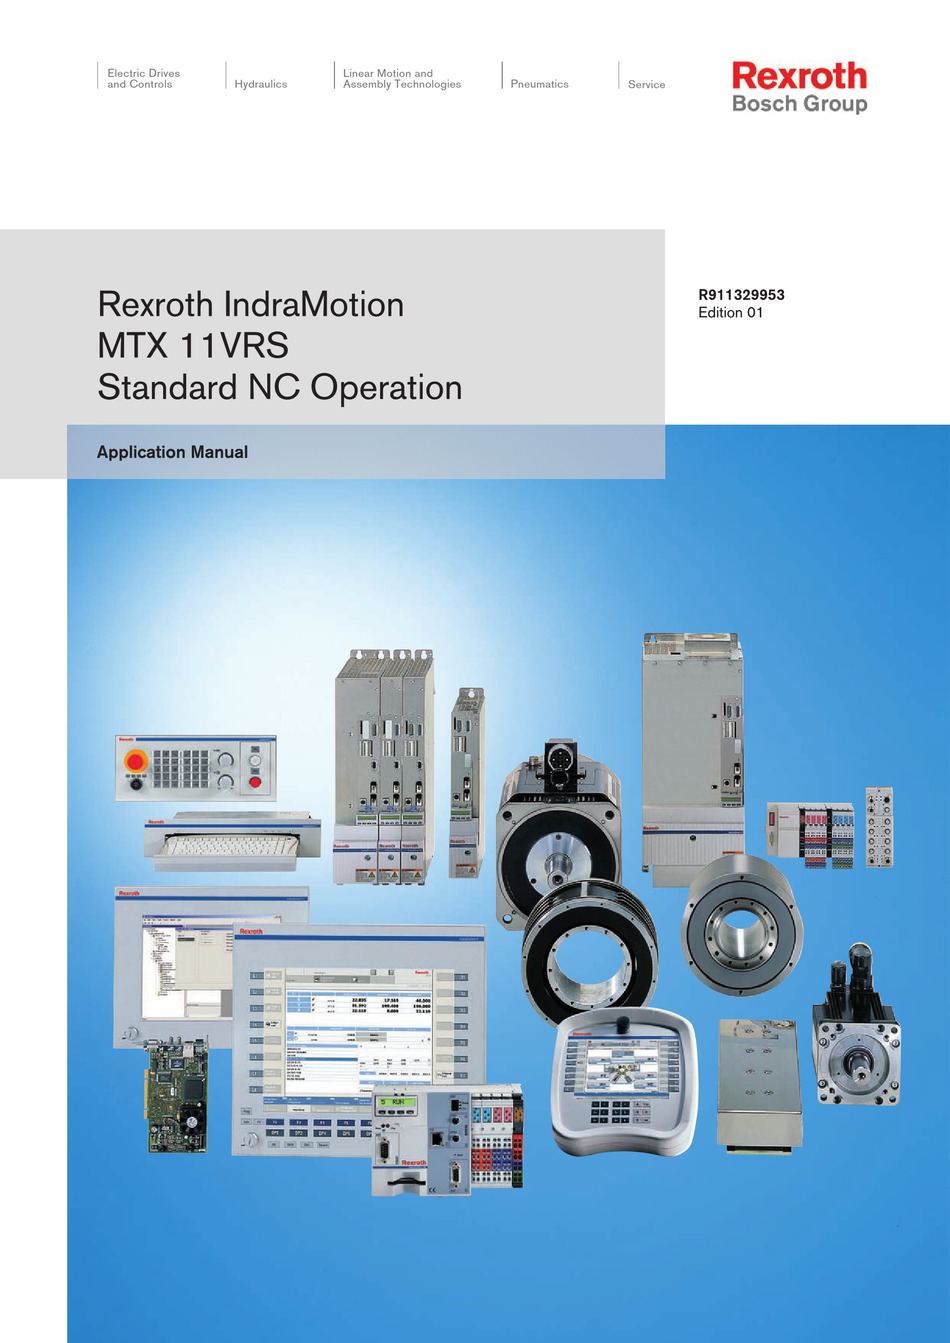 Bosch Rexroth Indramotion Mtx 11 Vrs Applications Manual Pdf Download